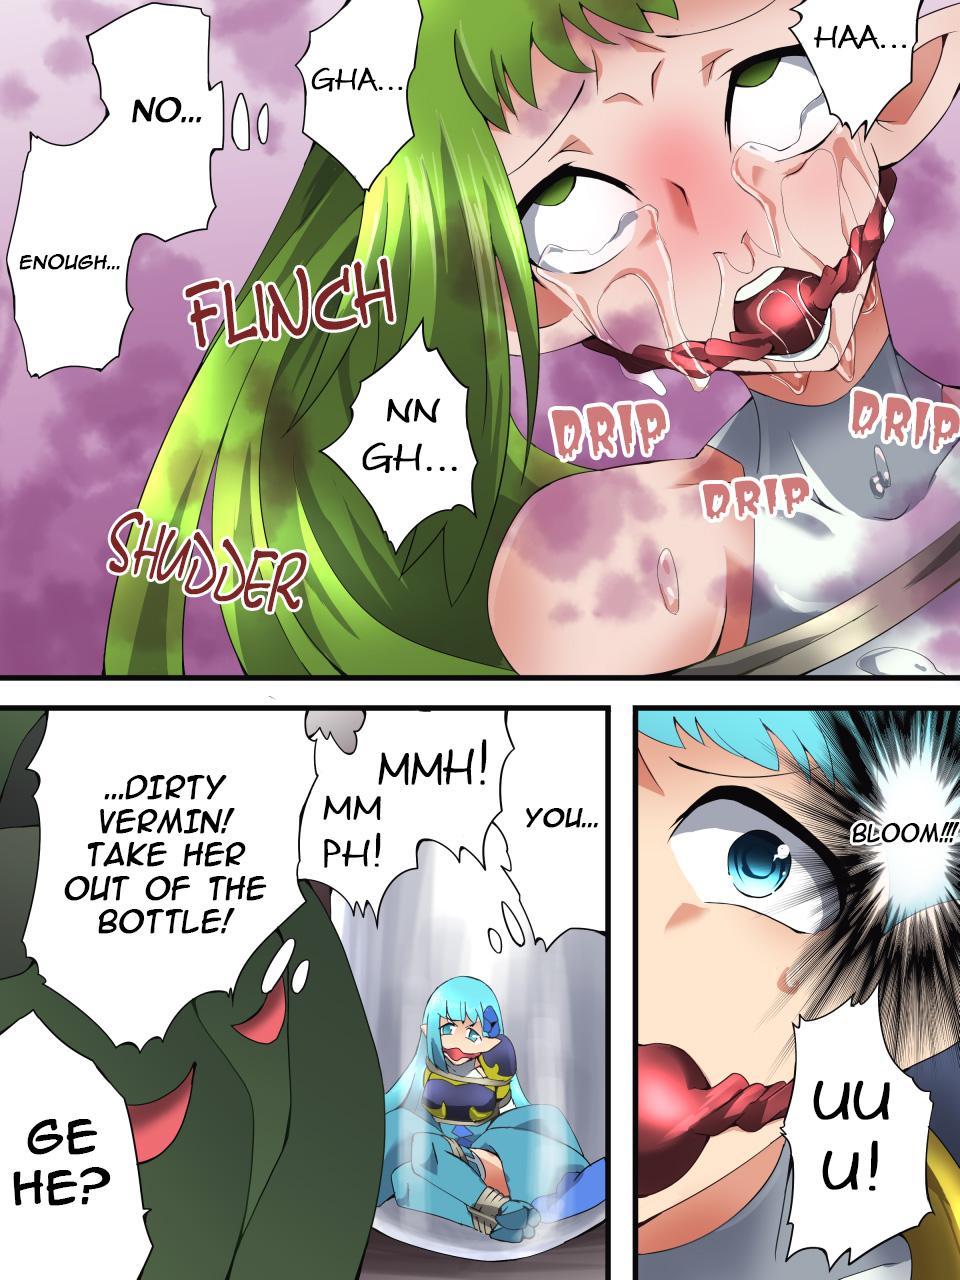 Couples Fucking Fairy Knight Fairy Bloom Ep3 English Ver. - Original Francaise - Page 10